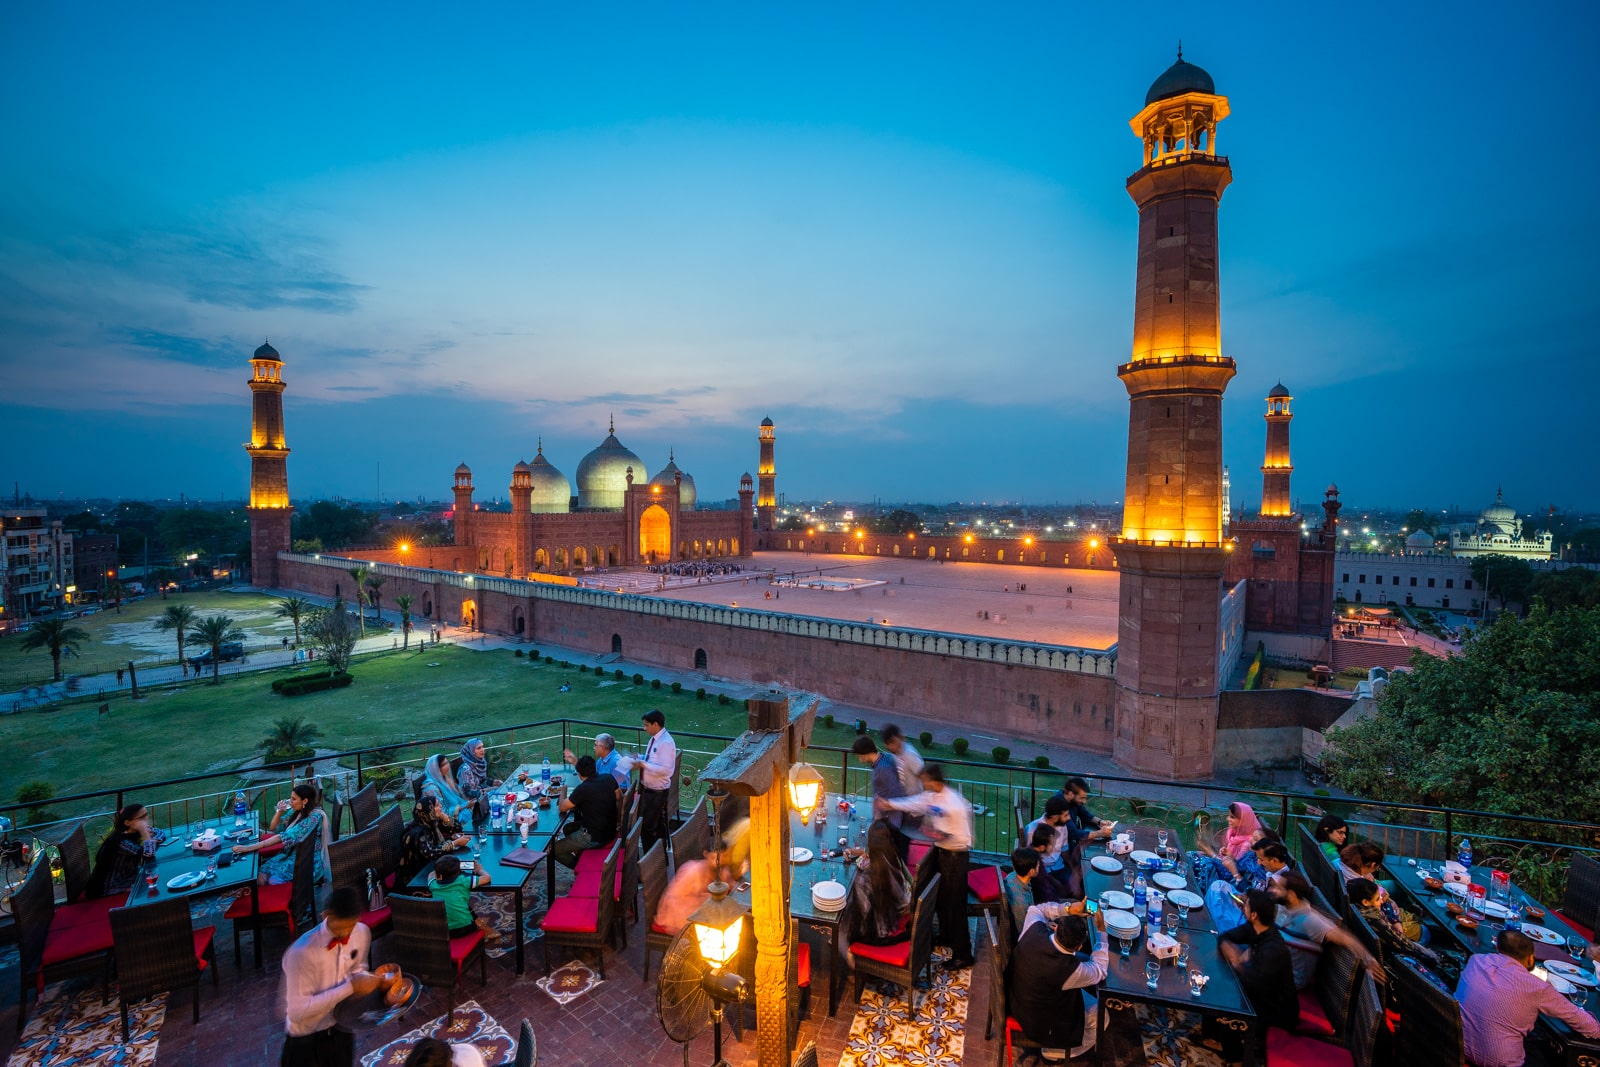 Badshahi Mosque in Lahore, Pakistan at sunset with people eating dinner a